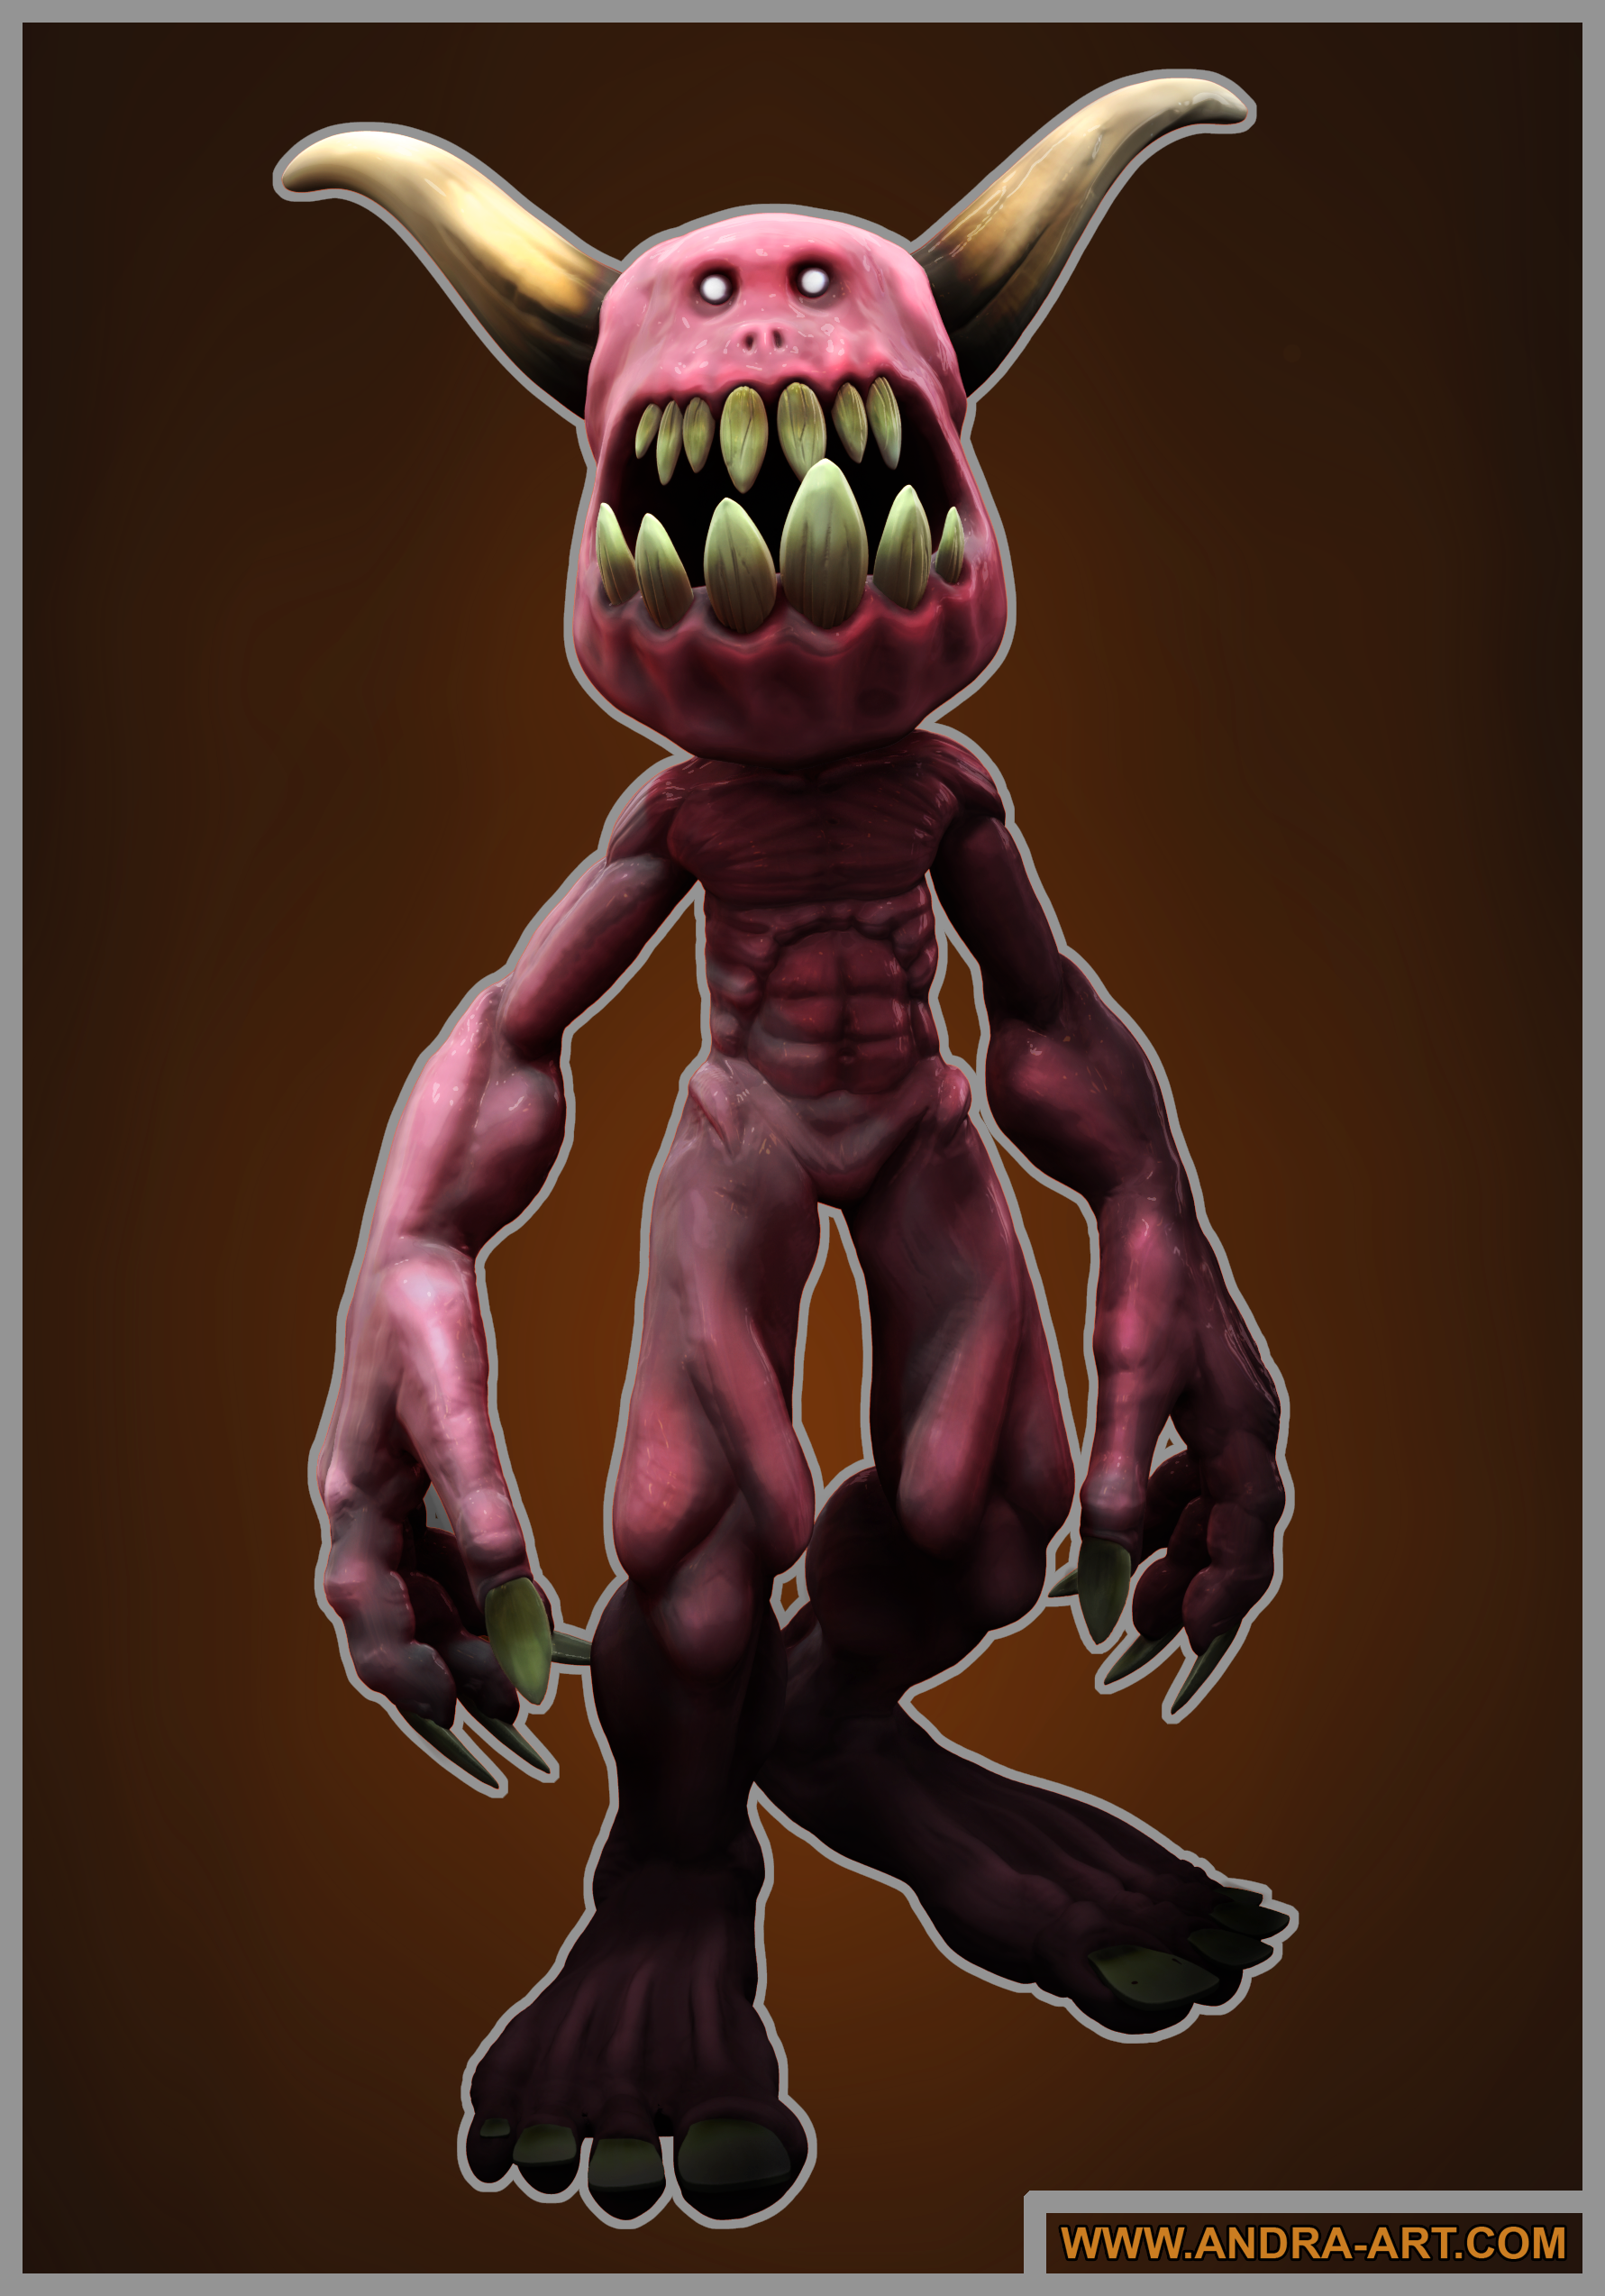 demon_by_andra_arts-d74cn9d.png